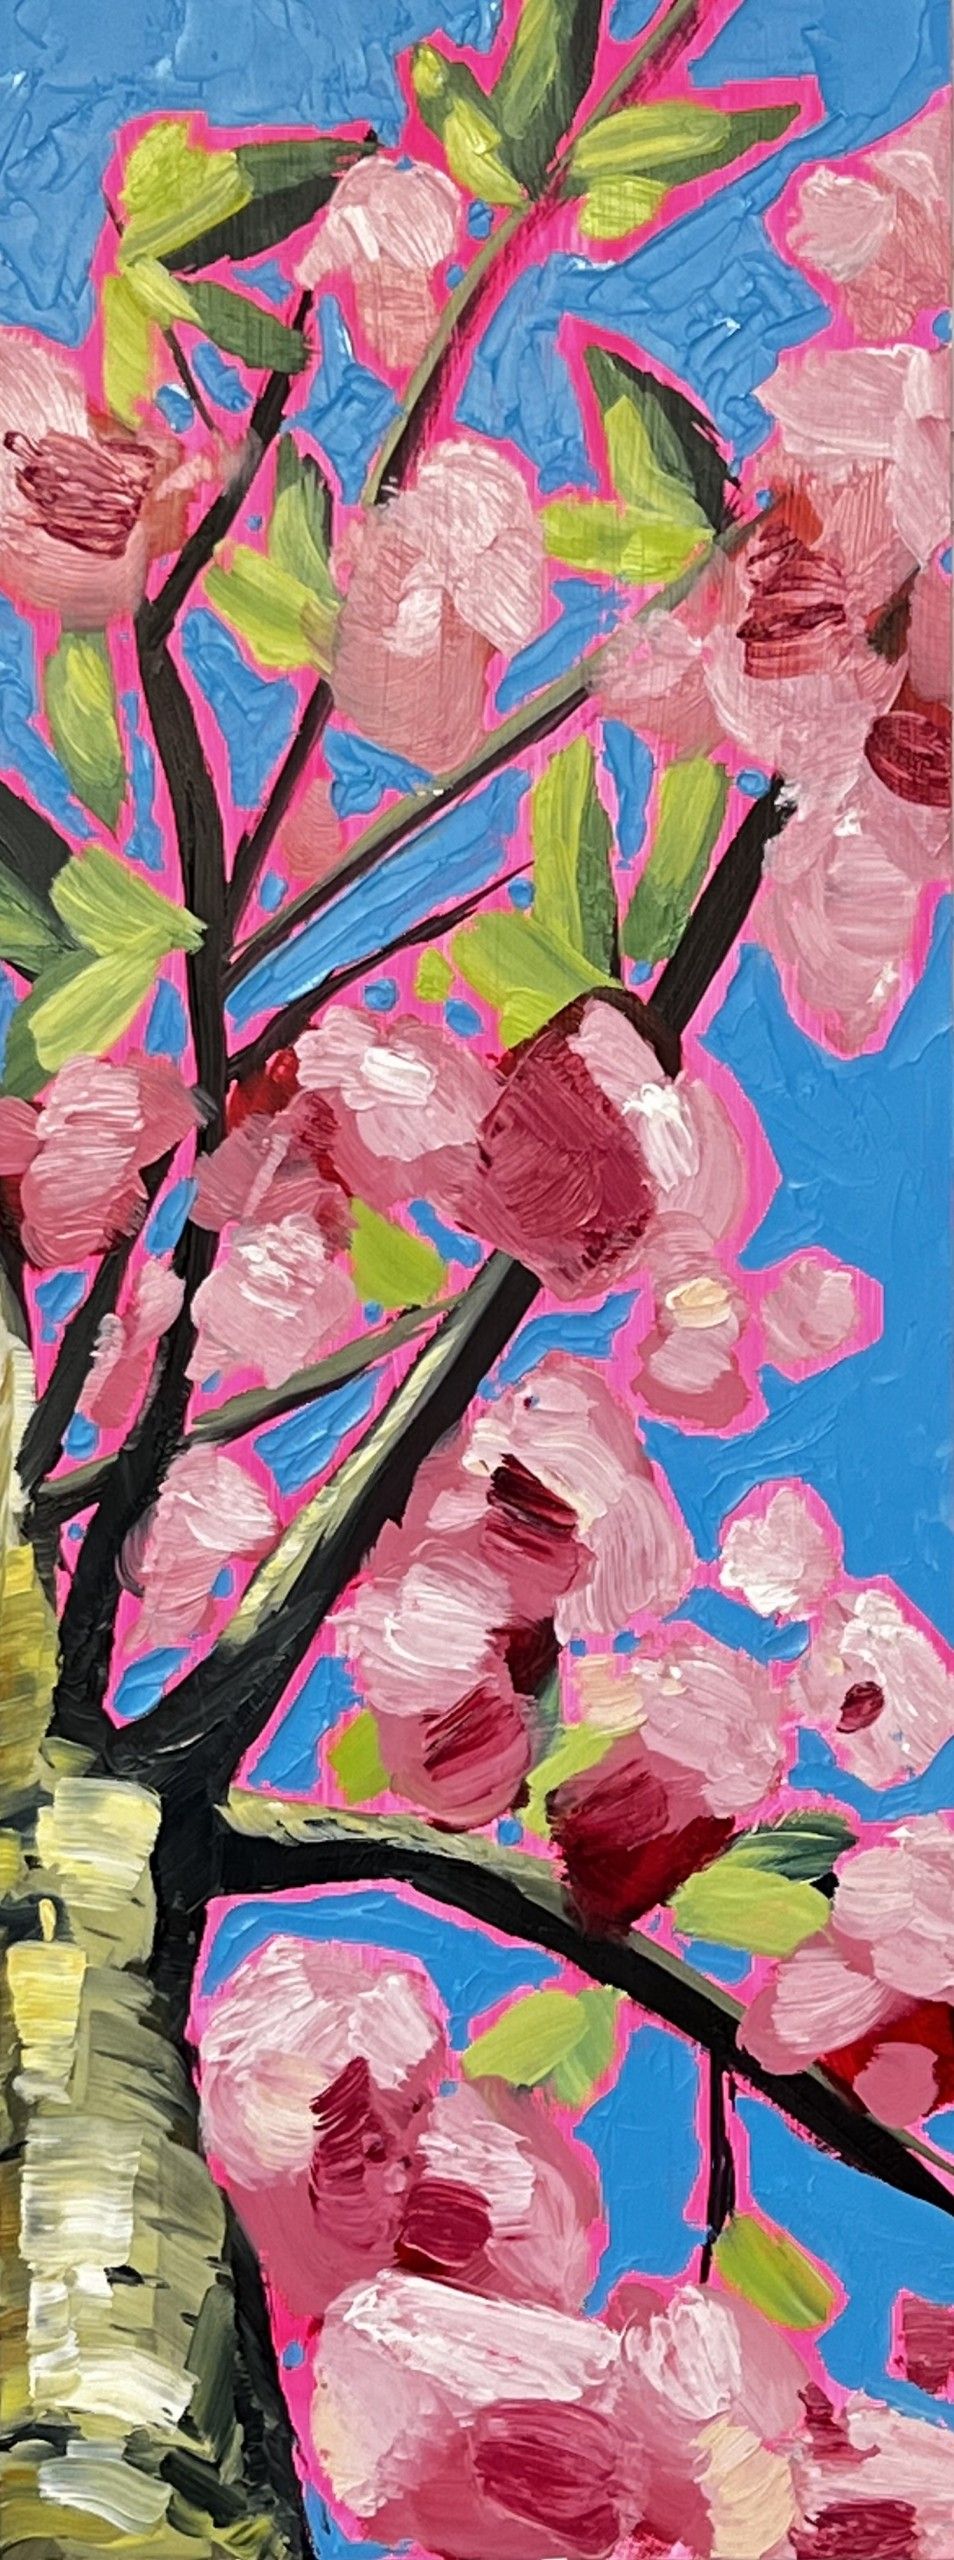 Looking Up Through Pink Blossom to Feel Loved by Emily Finch